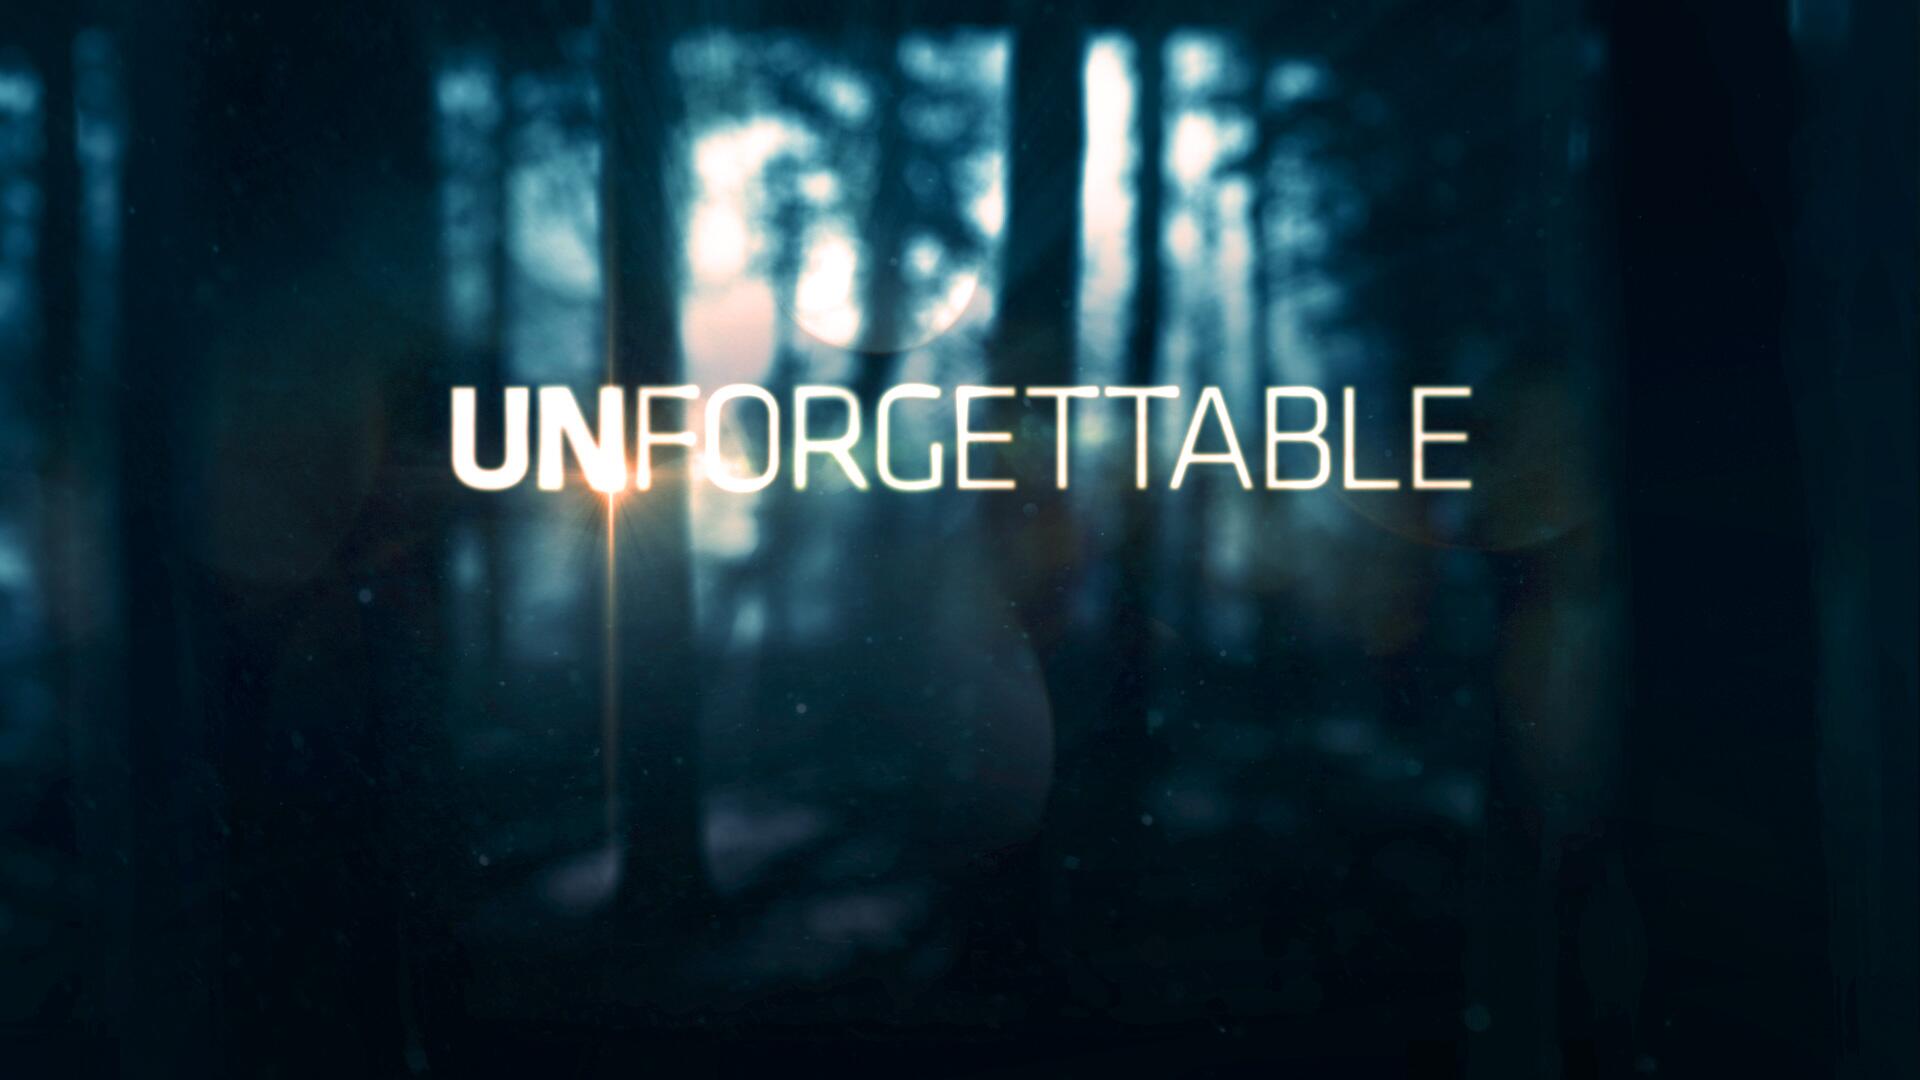 Unforgettable Incident: A Personal Experience